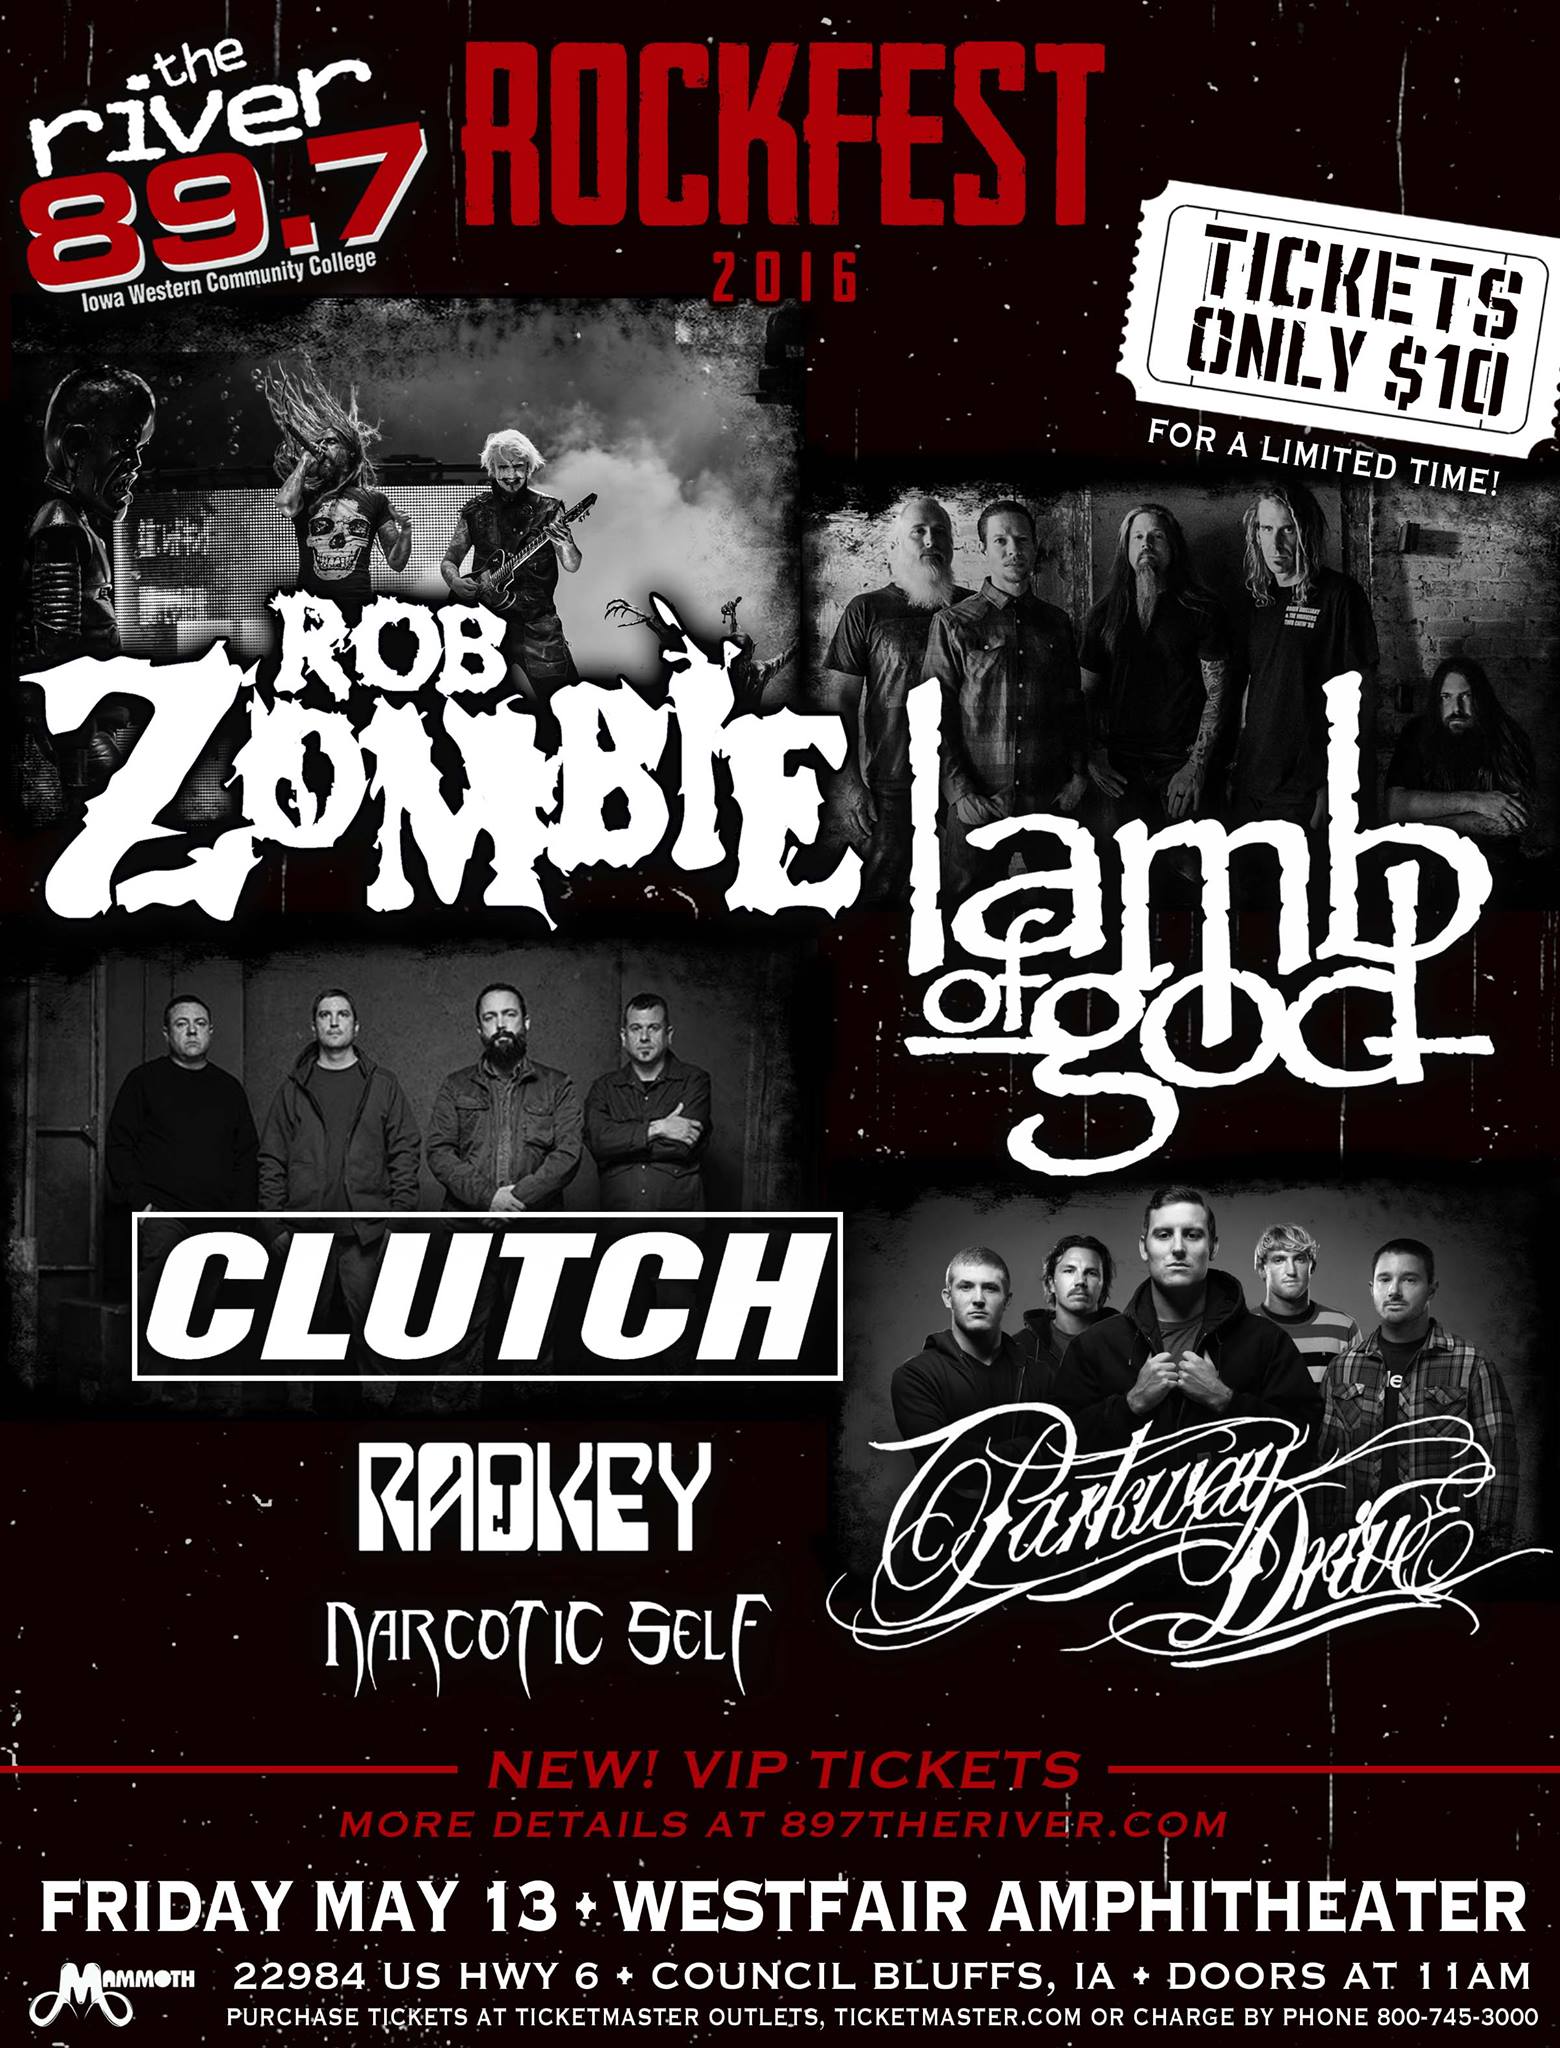 89.7 The River Presents ROCKFEST 2016 - Side Stage Magazine